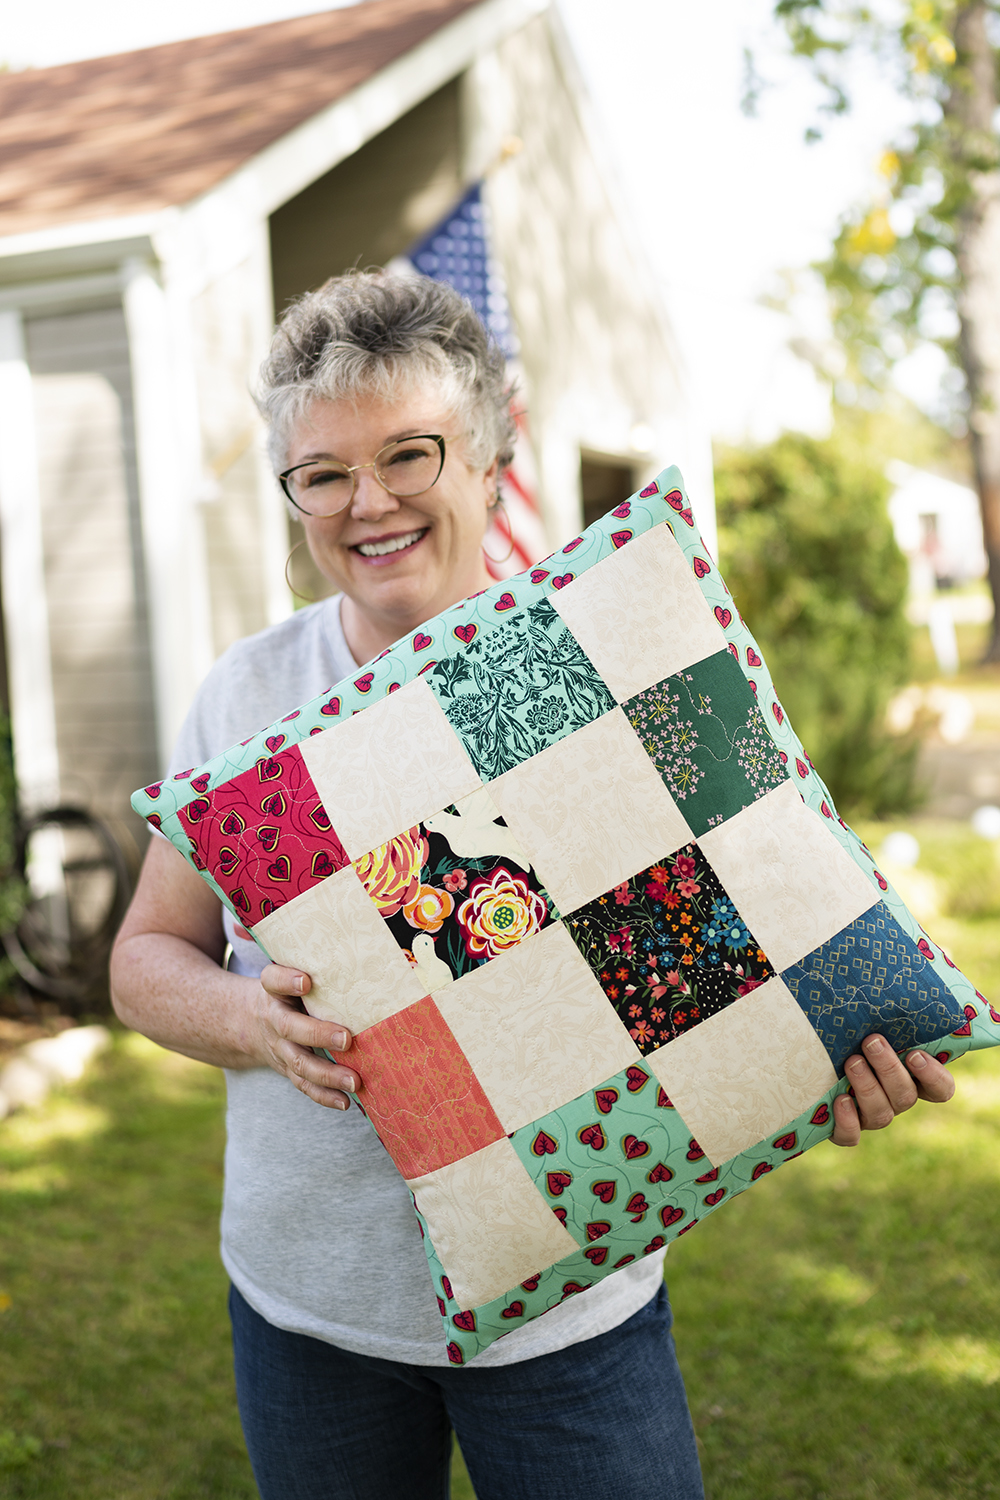 How to sew a Quilted Patchwork Cushion